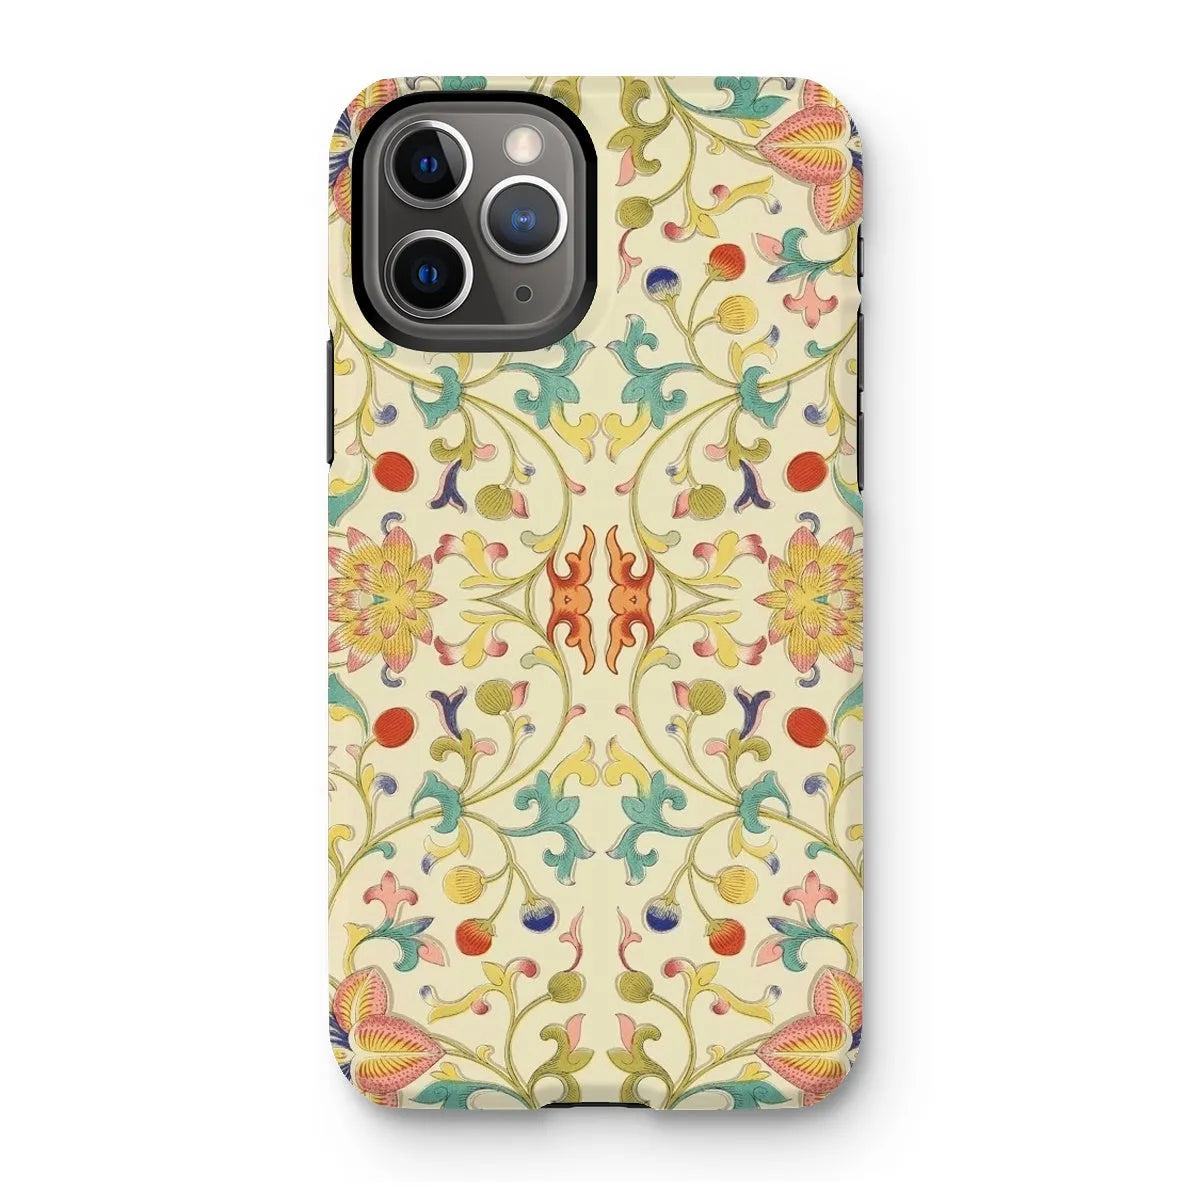 Over The Rainbow - Chinoiserie Pattern Art Phone Case - Iphone 11 Pro / Matte - Mobile Phone Cases - Aesthetic Art